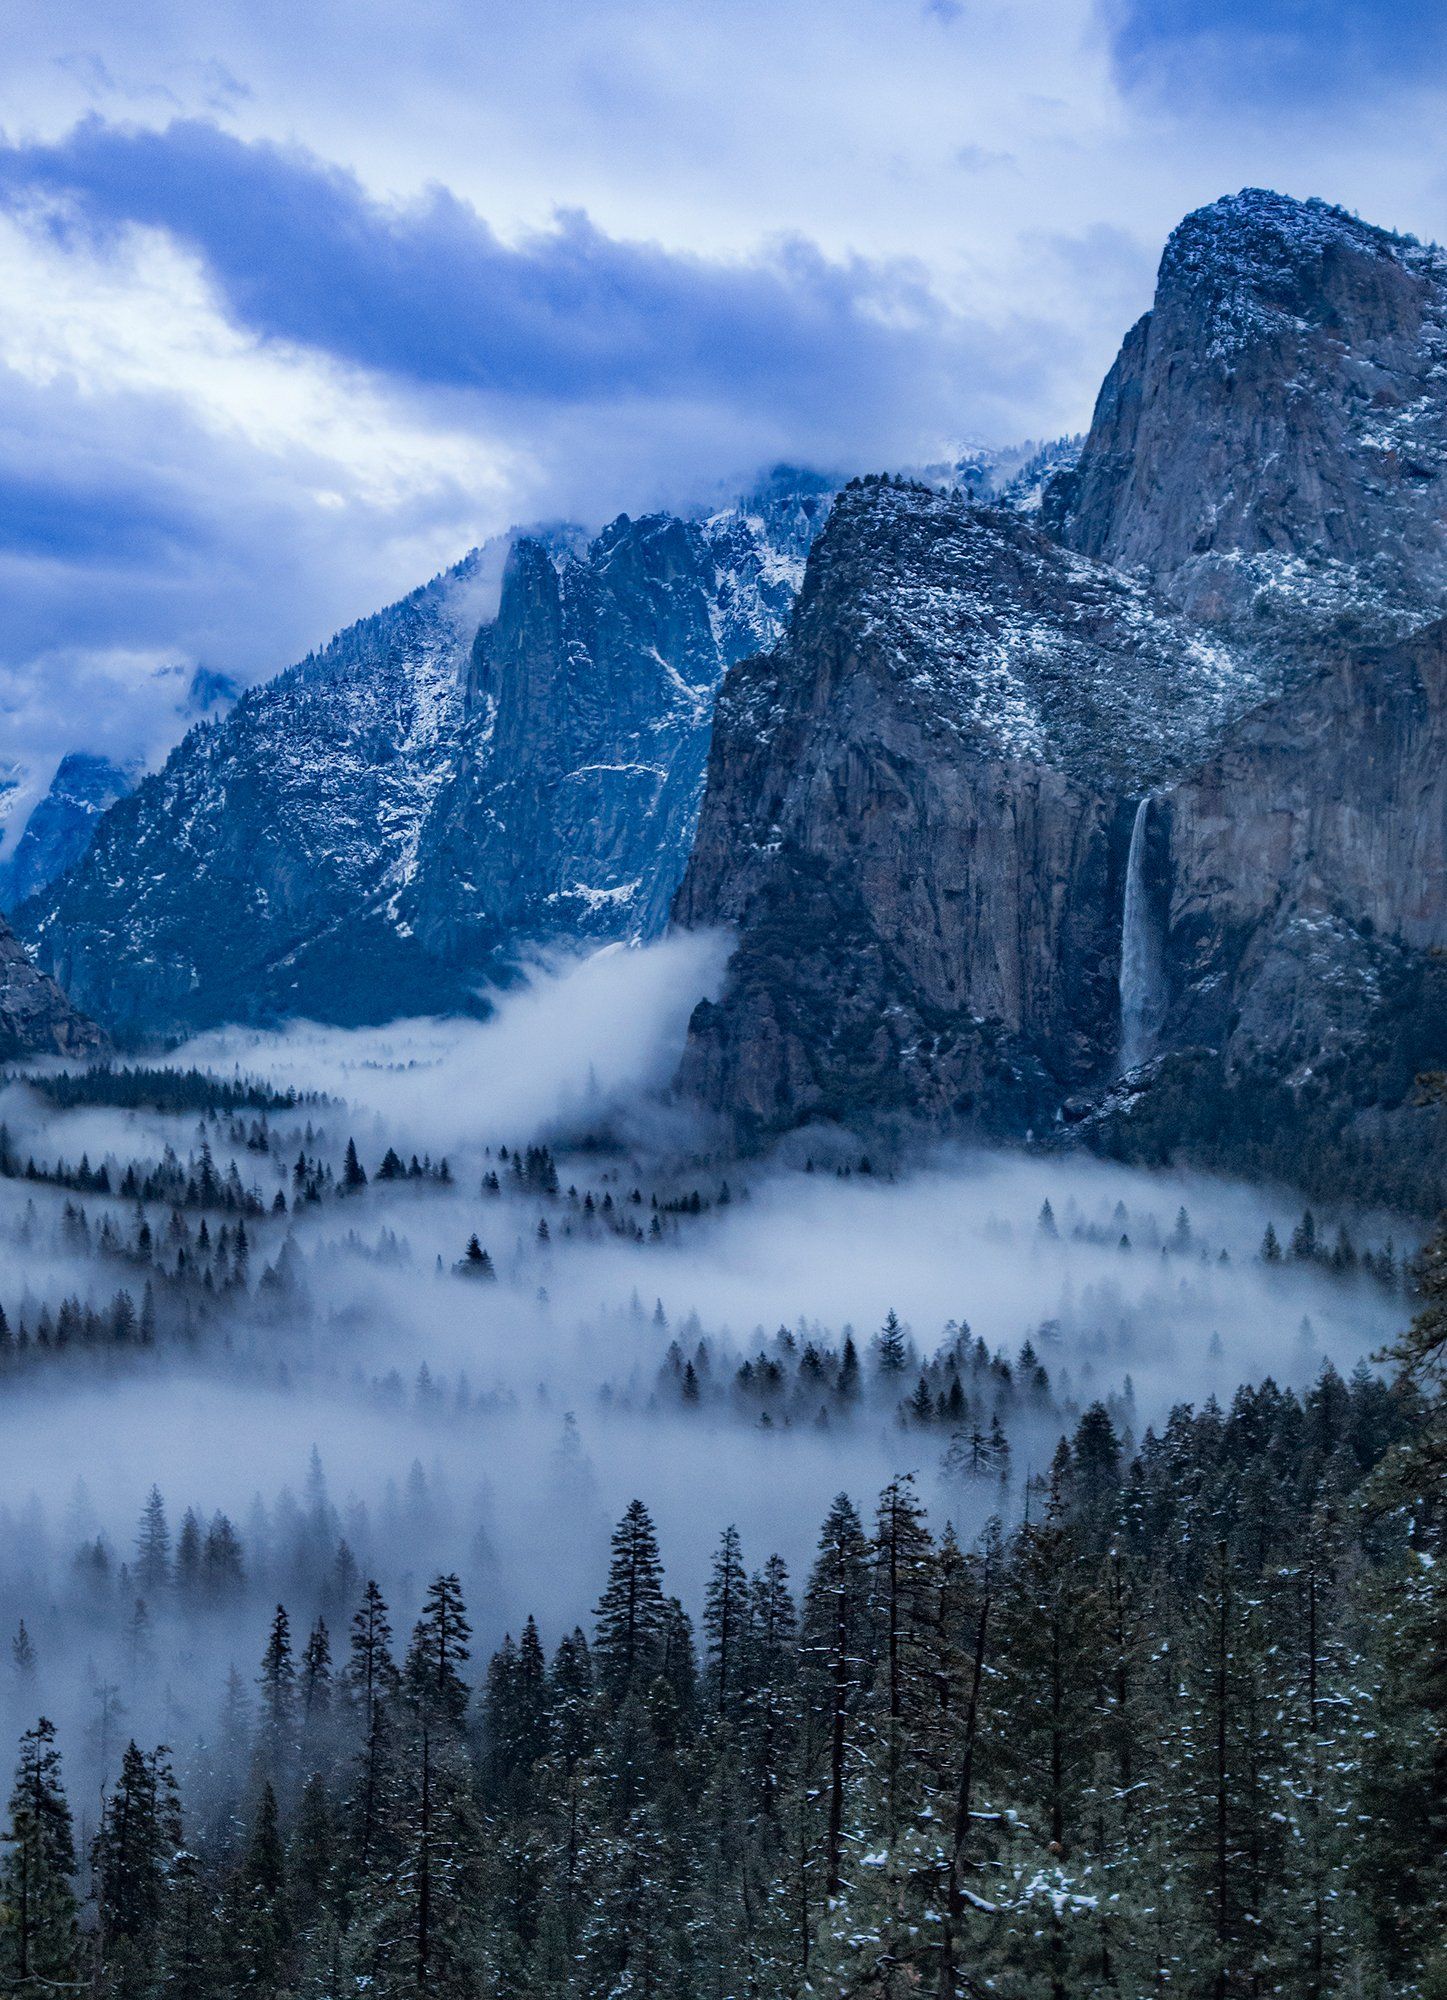 Late winter storm clearing, Yosemite Valley, California